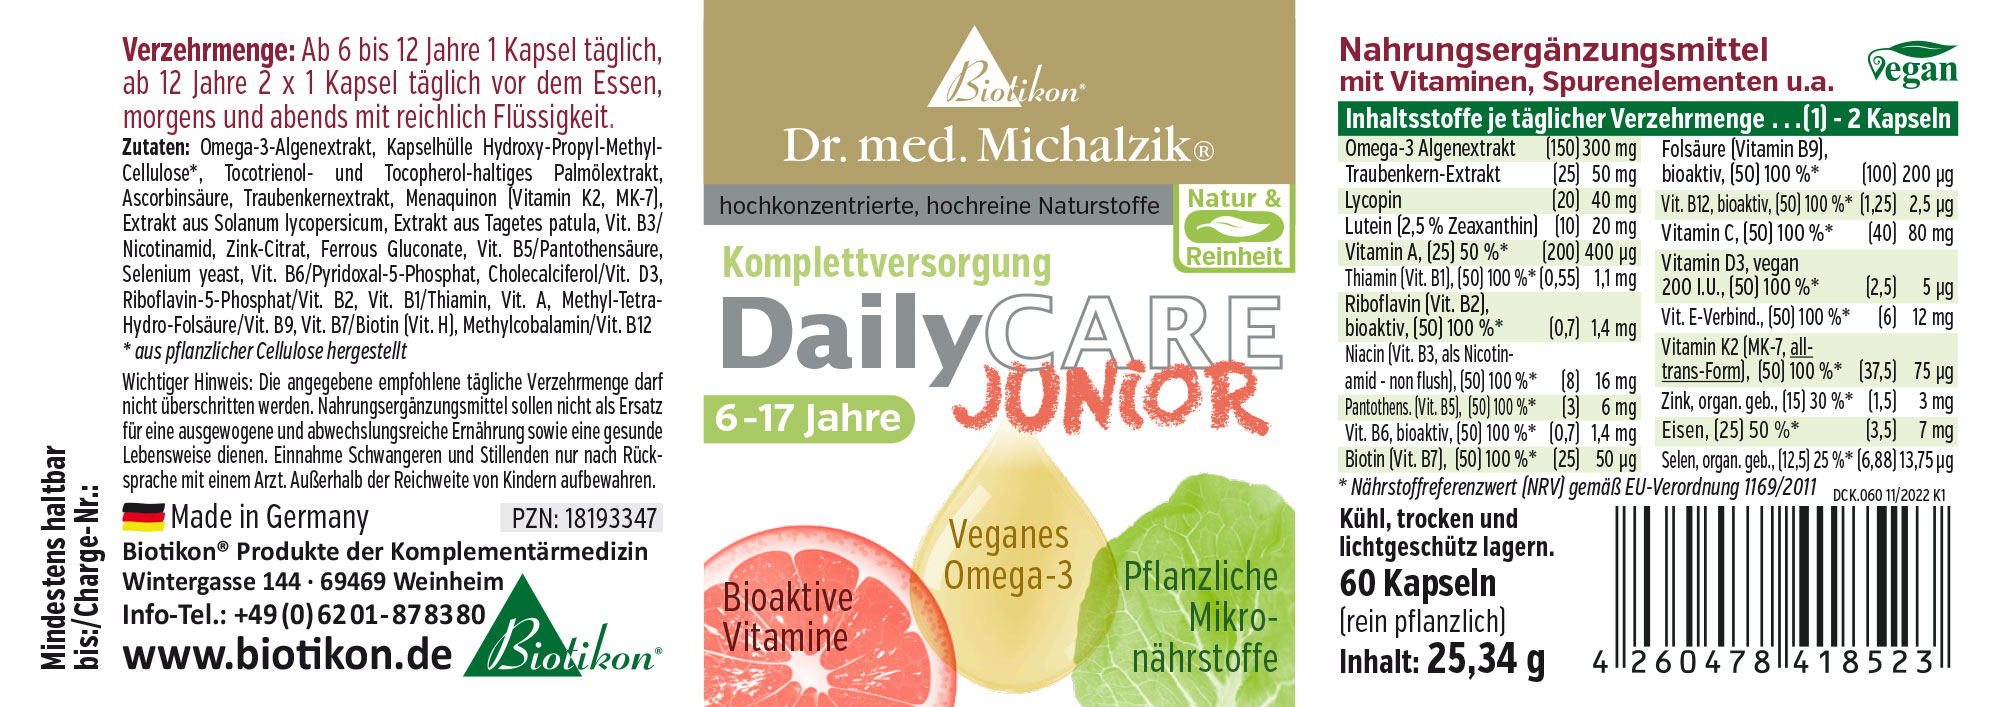 DailyCare Junior - Bioactive vitamins, omega 3 vegan + trace elements and high-quality plant substances